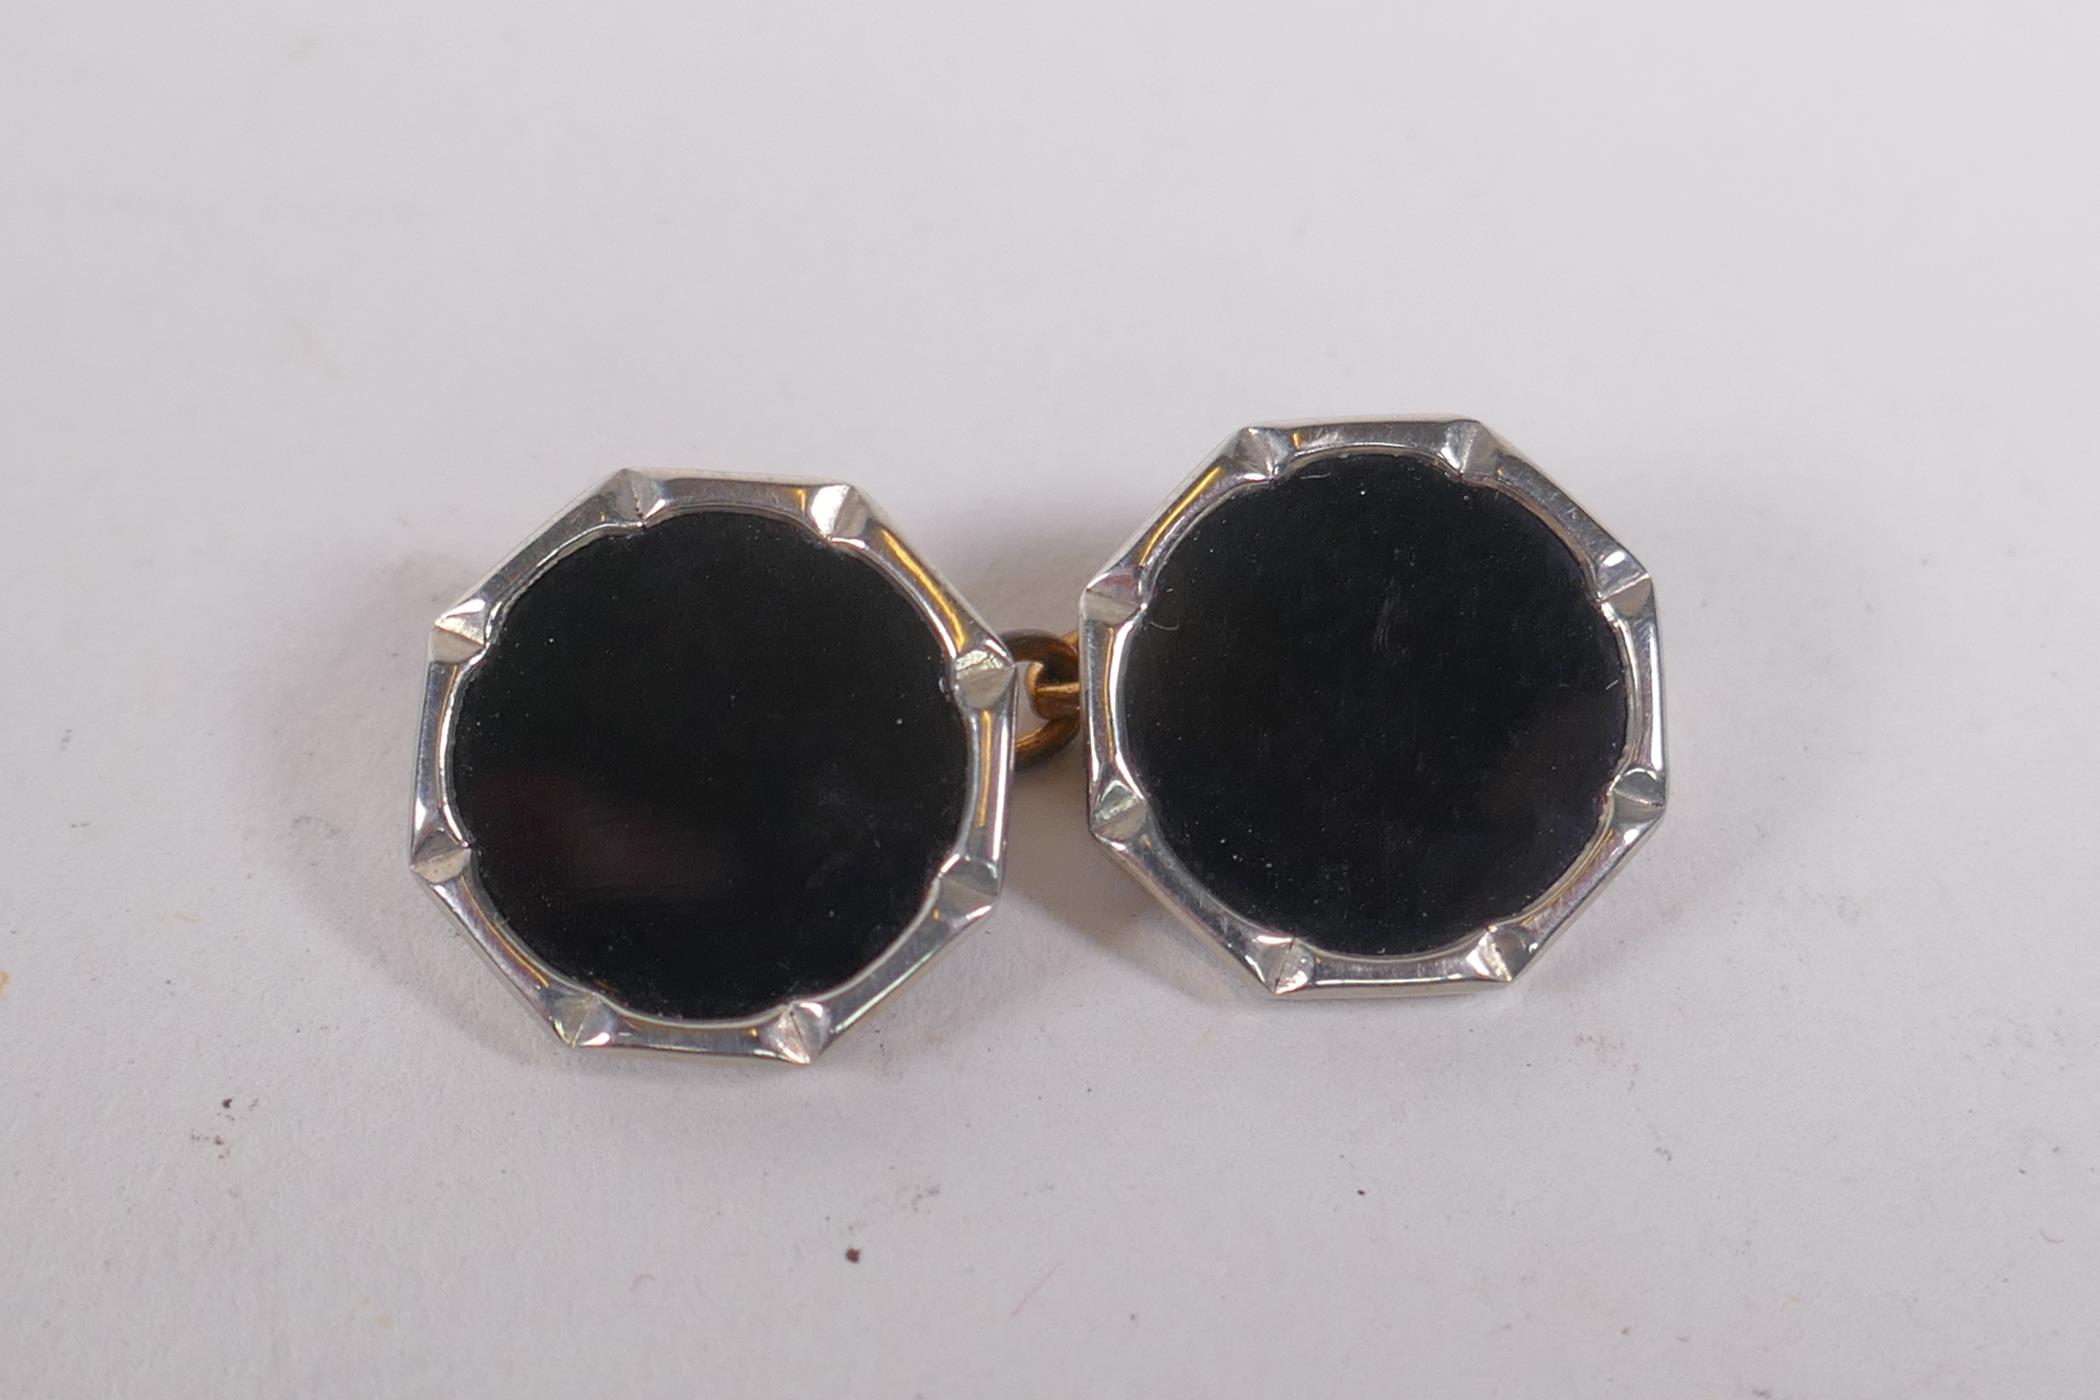 A cased set of black enamel and white metal cufflinks and studs, 1 stud missing - Image 3 of 3